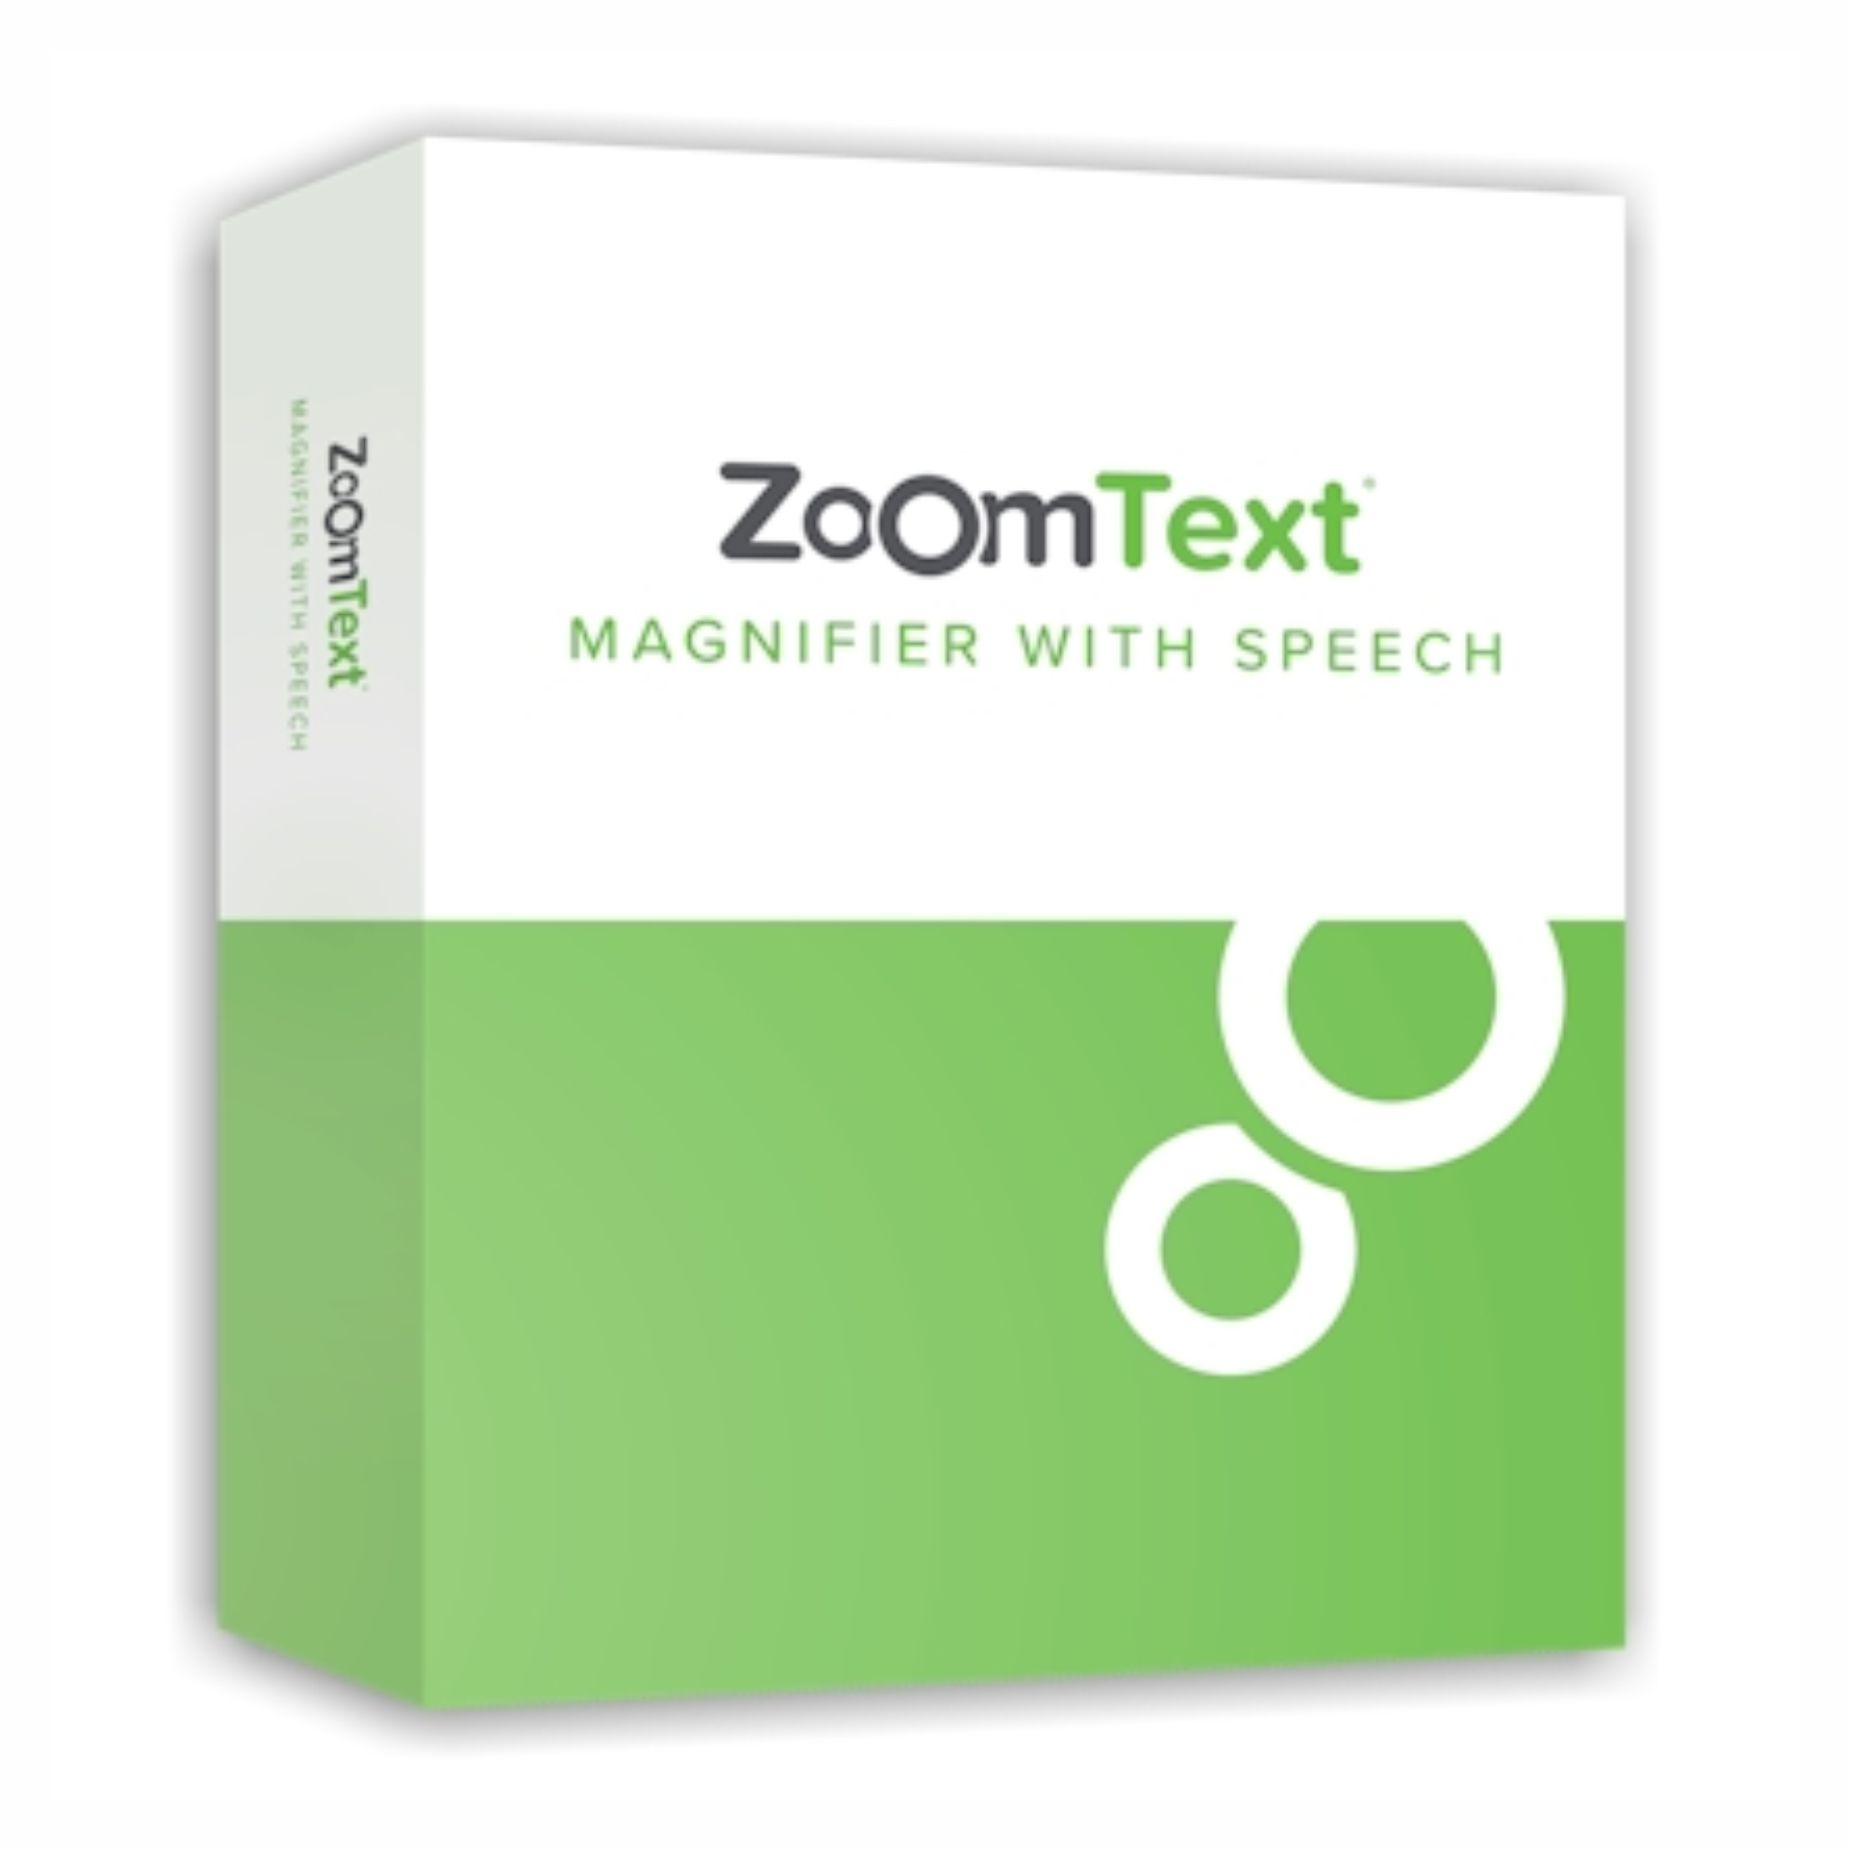 ZoomText (software)